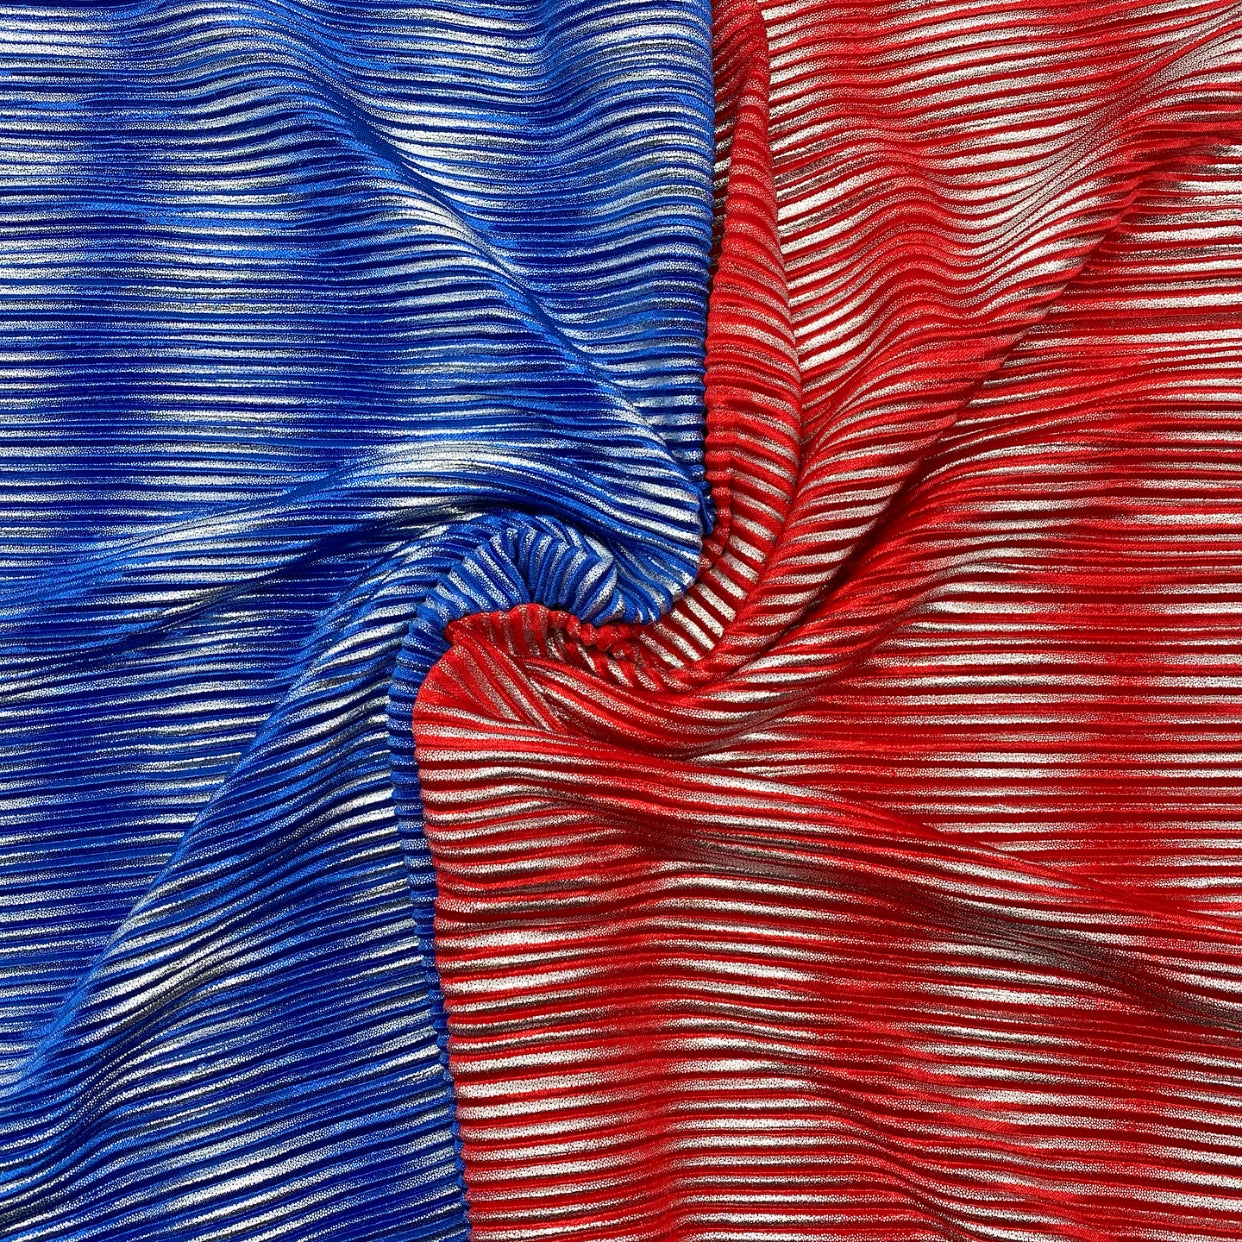 Blue & Red Metallic Sparkle Silver Foil Pleated Jersey Fabric